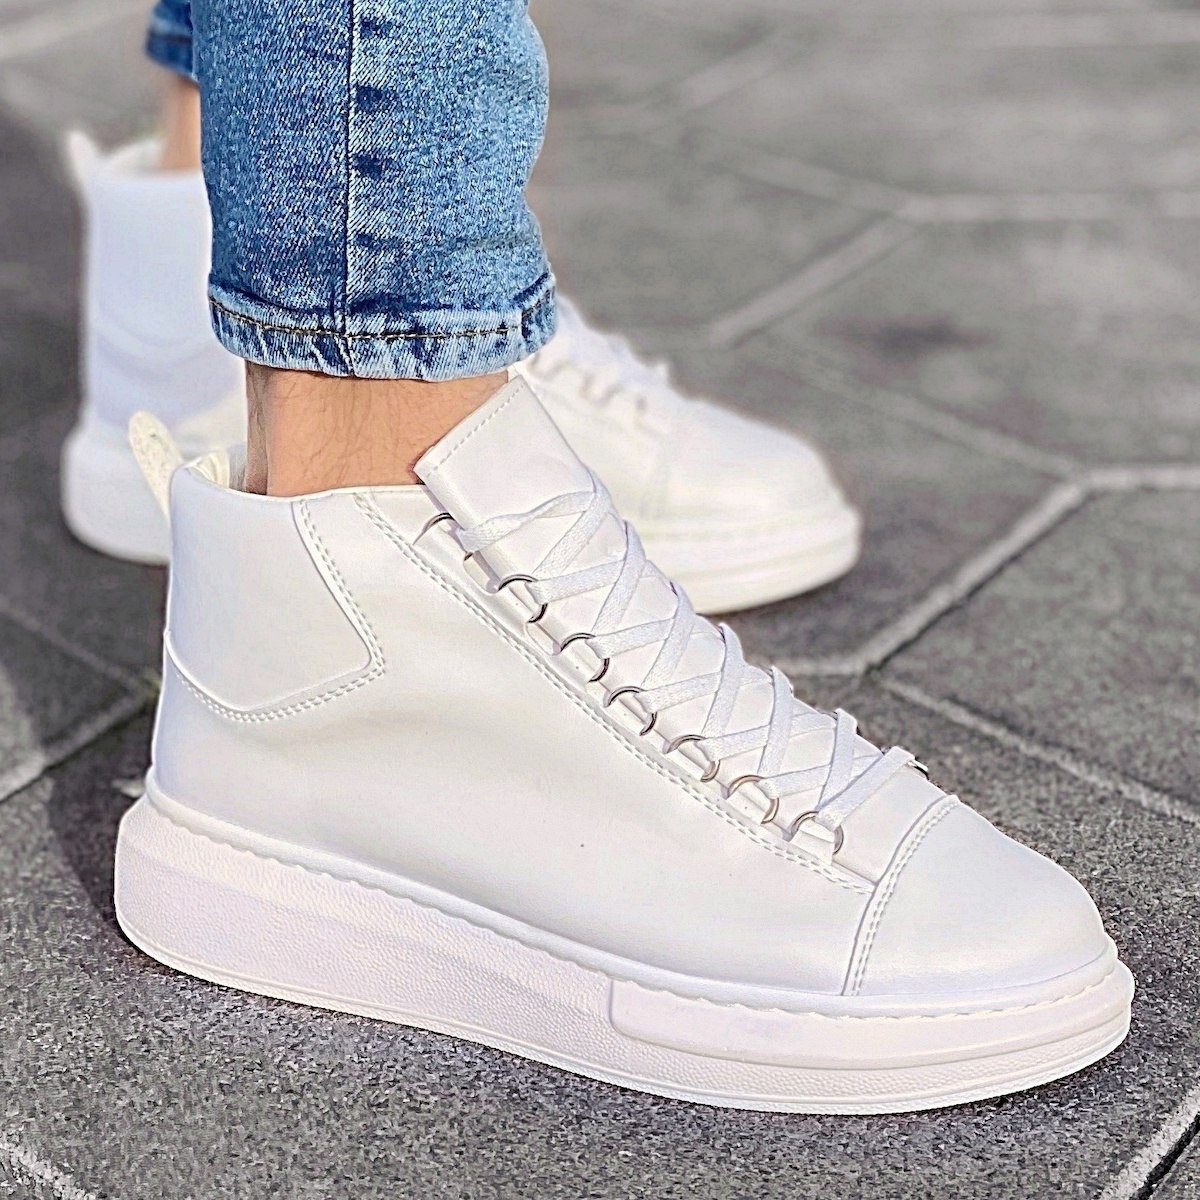 Hype Sole Mox High Top Sneakers in White - 2